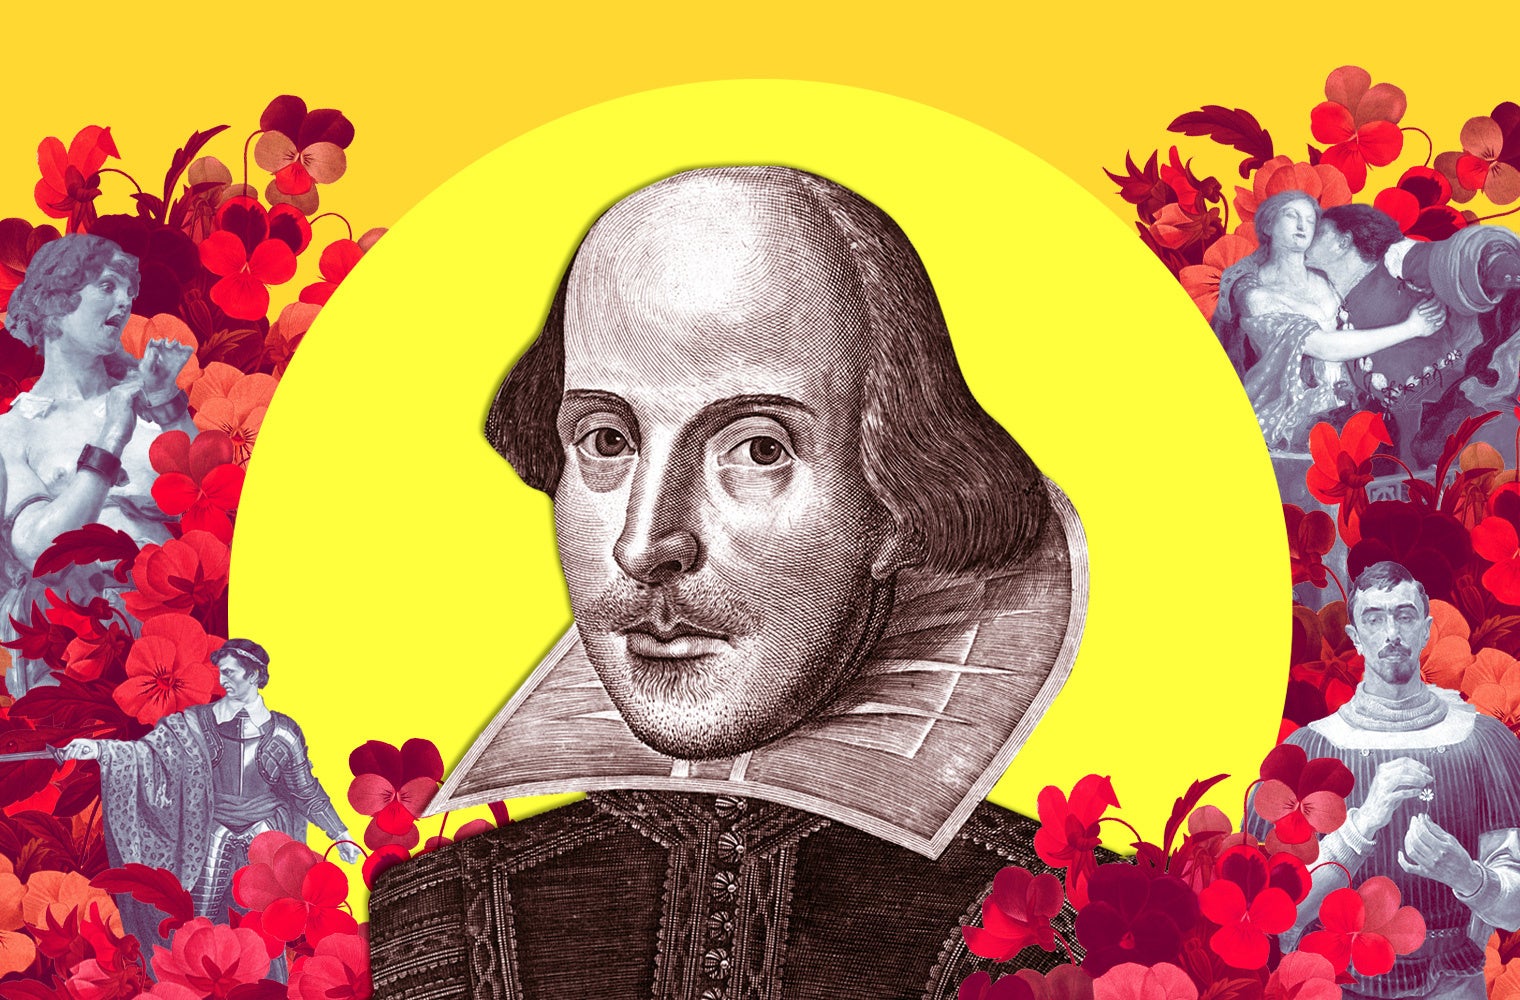 6 reasons Shakespeare remains an icon 400 years after his death